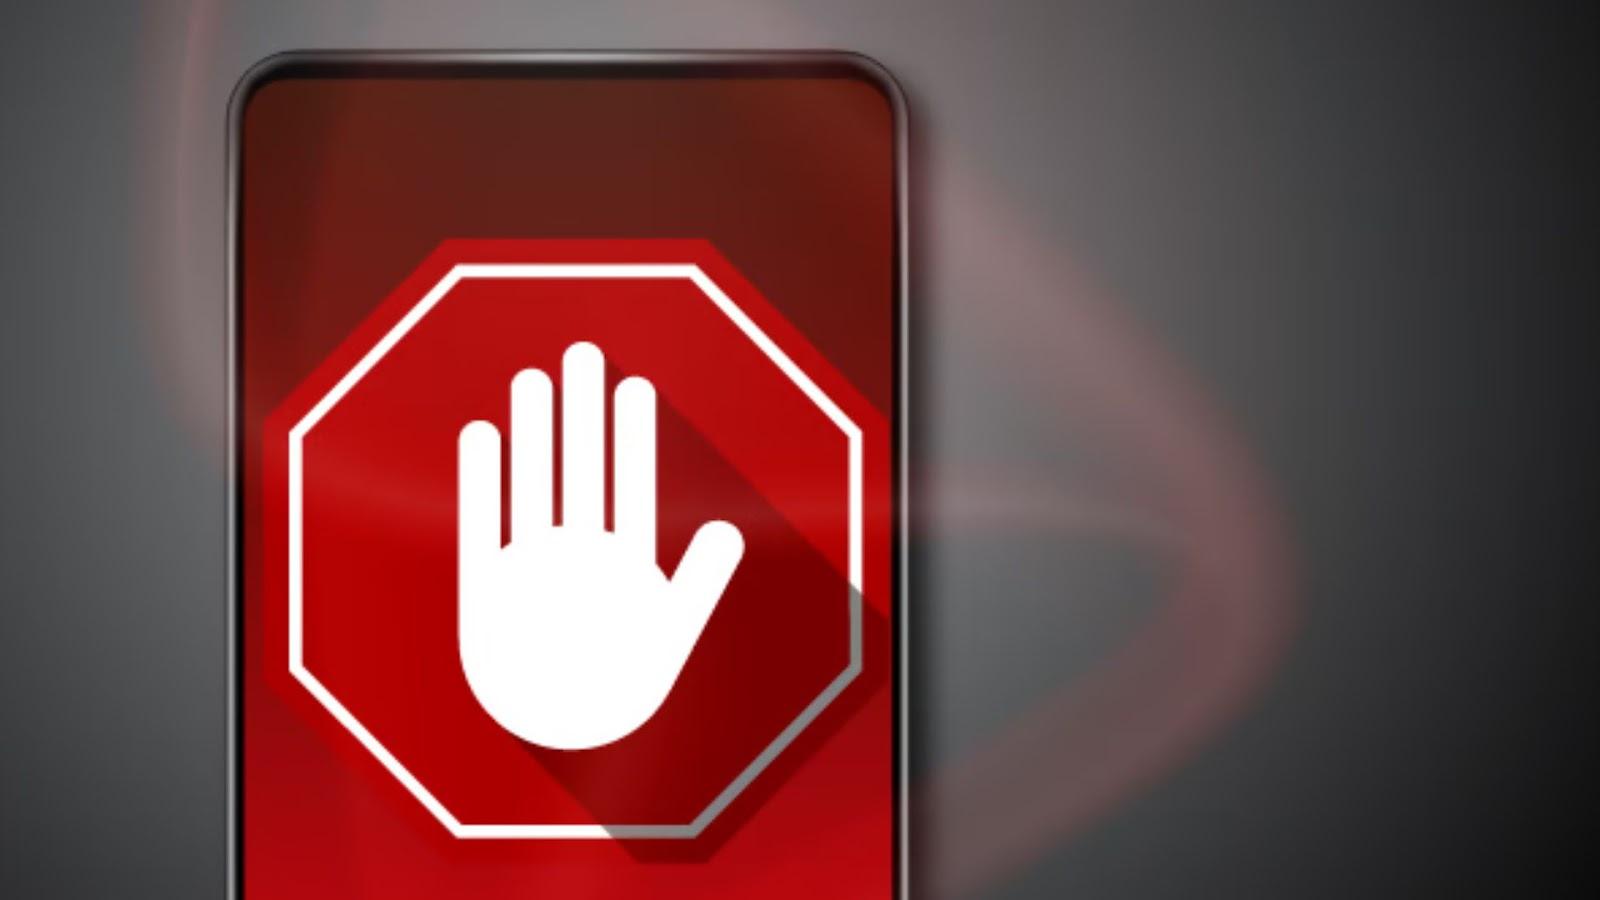 Best Android Ad Blocker